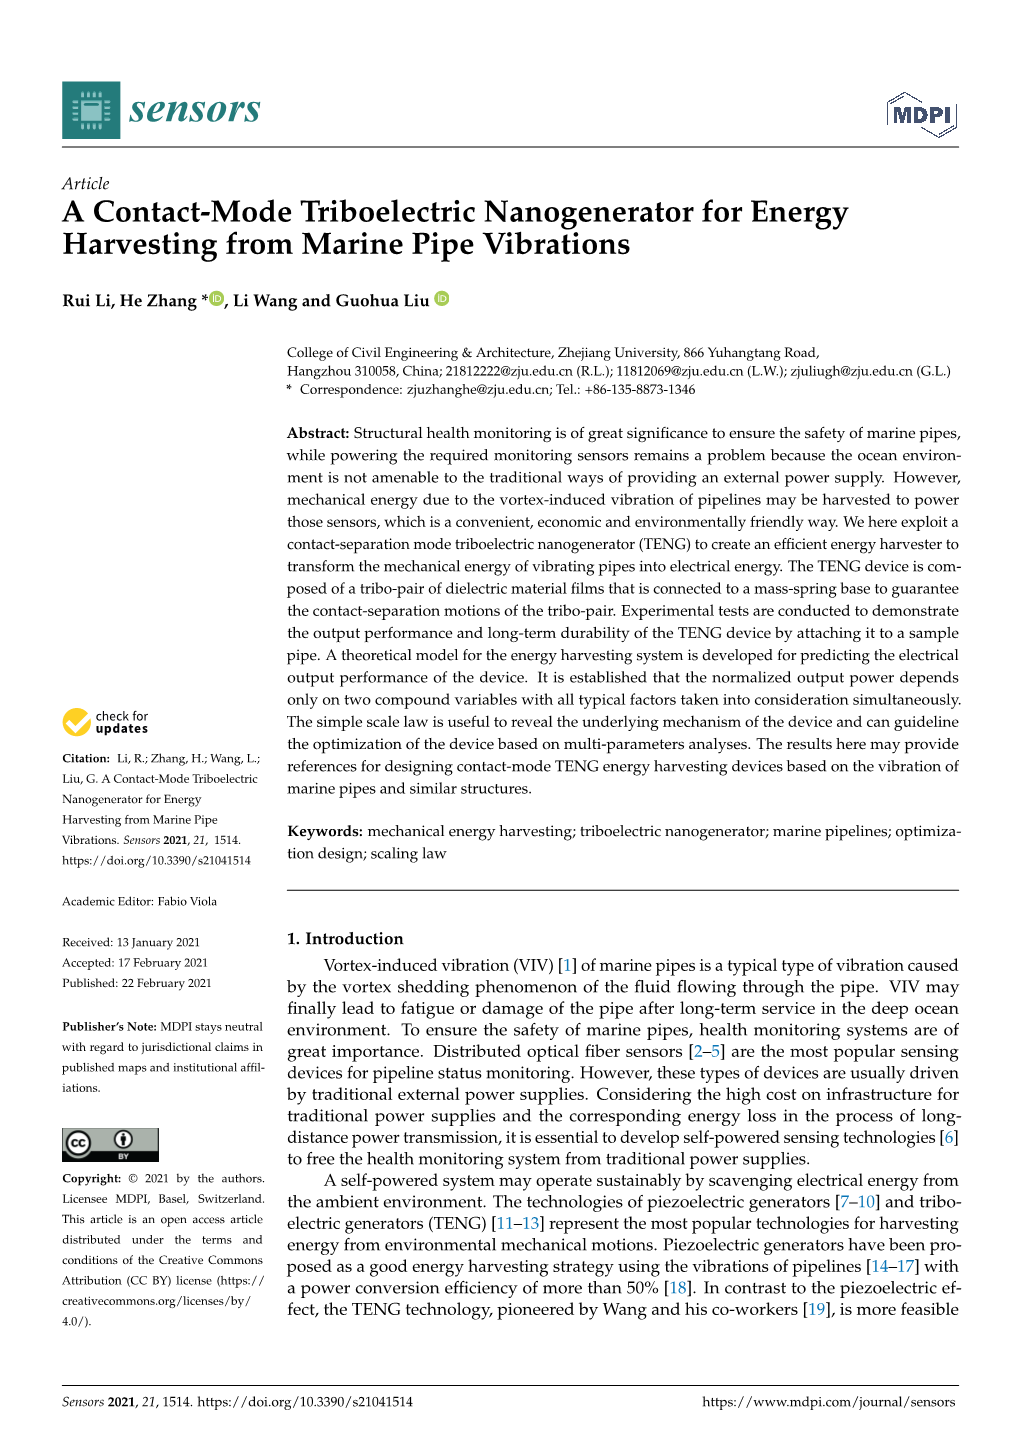 A Contact-Mode Triboelectric Nanogenerator for Energy Harvesting from Marine Pipe Vibrations